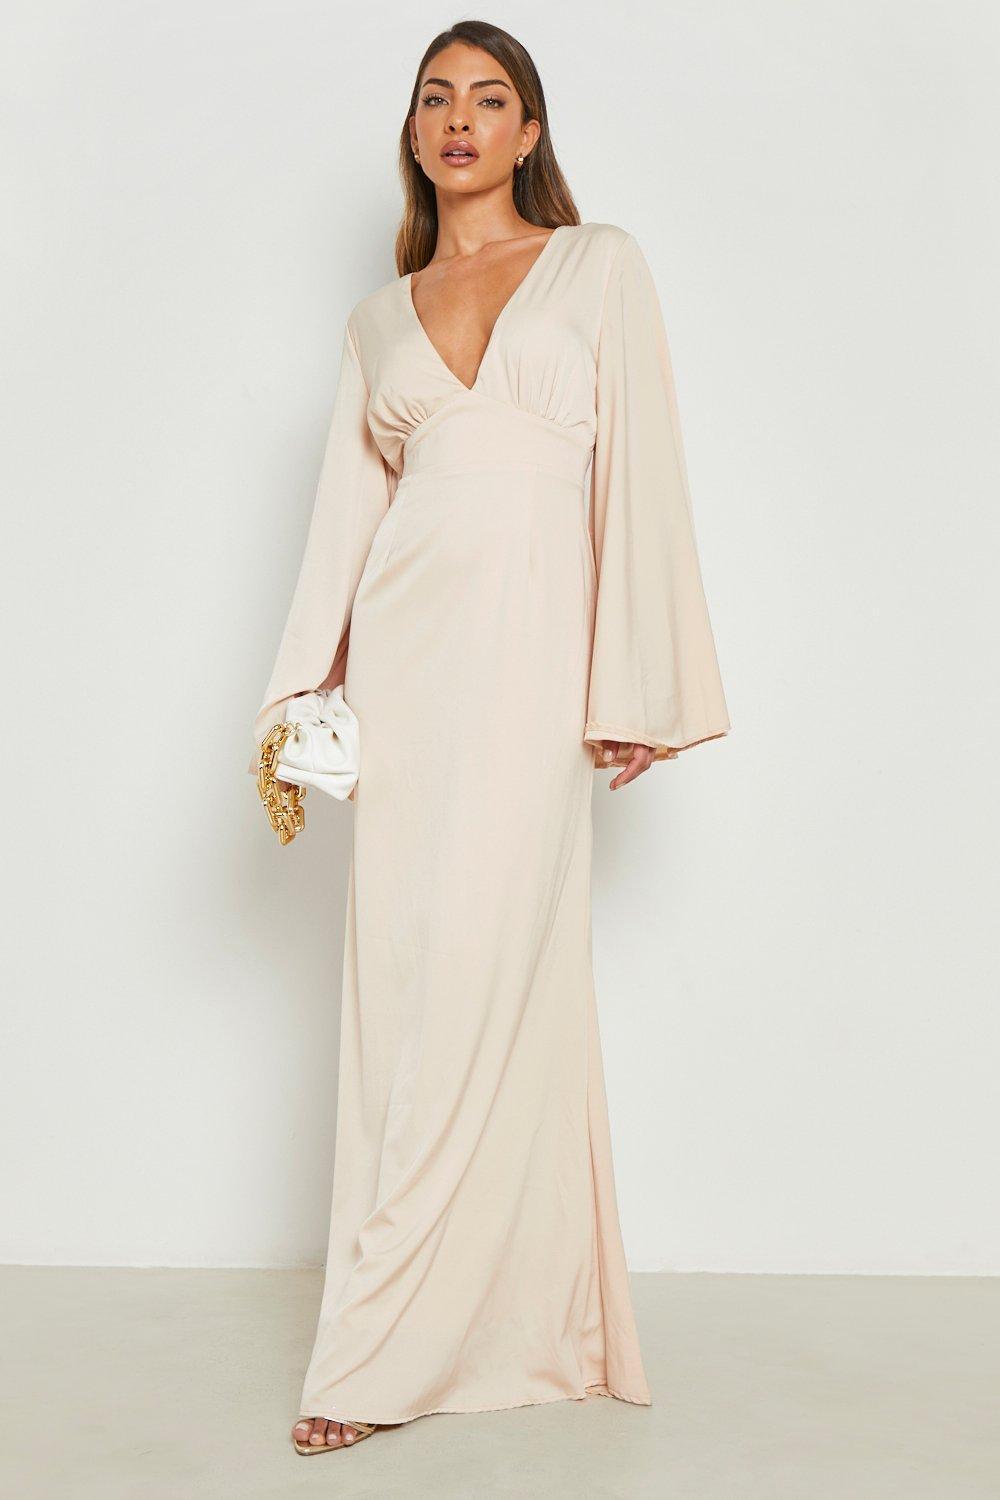 Boohoo Satin Open Back Flare Sleeve Maxi Dress in Natural | Lyst